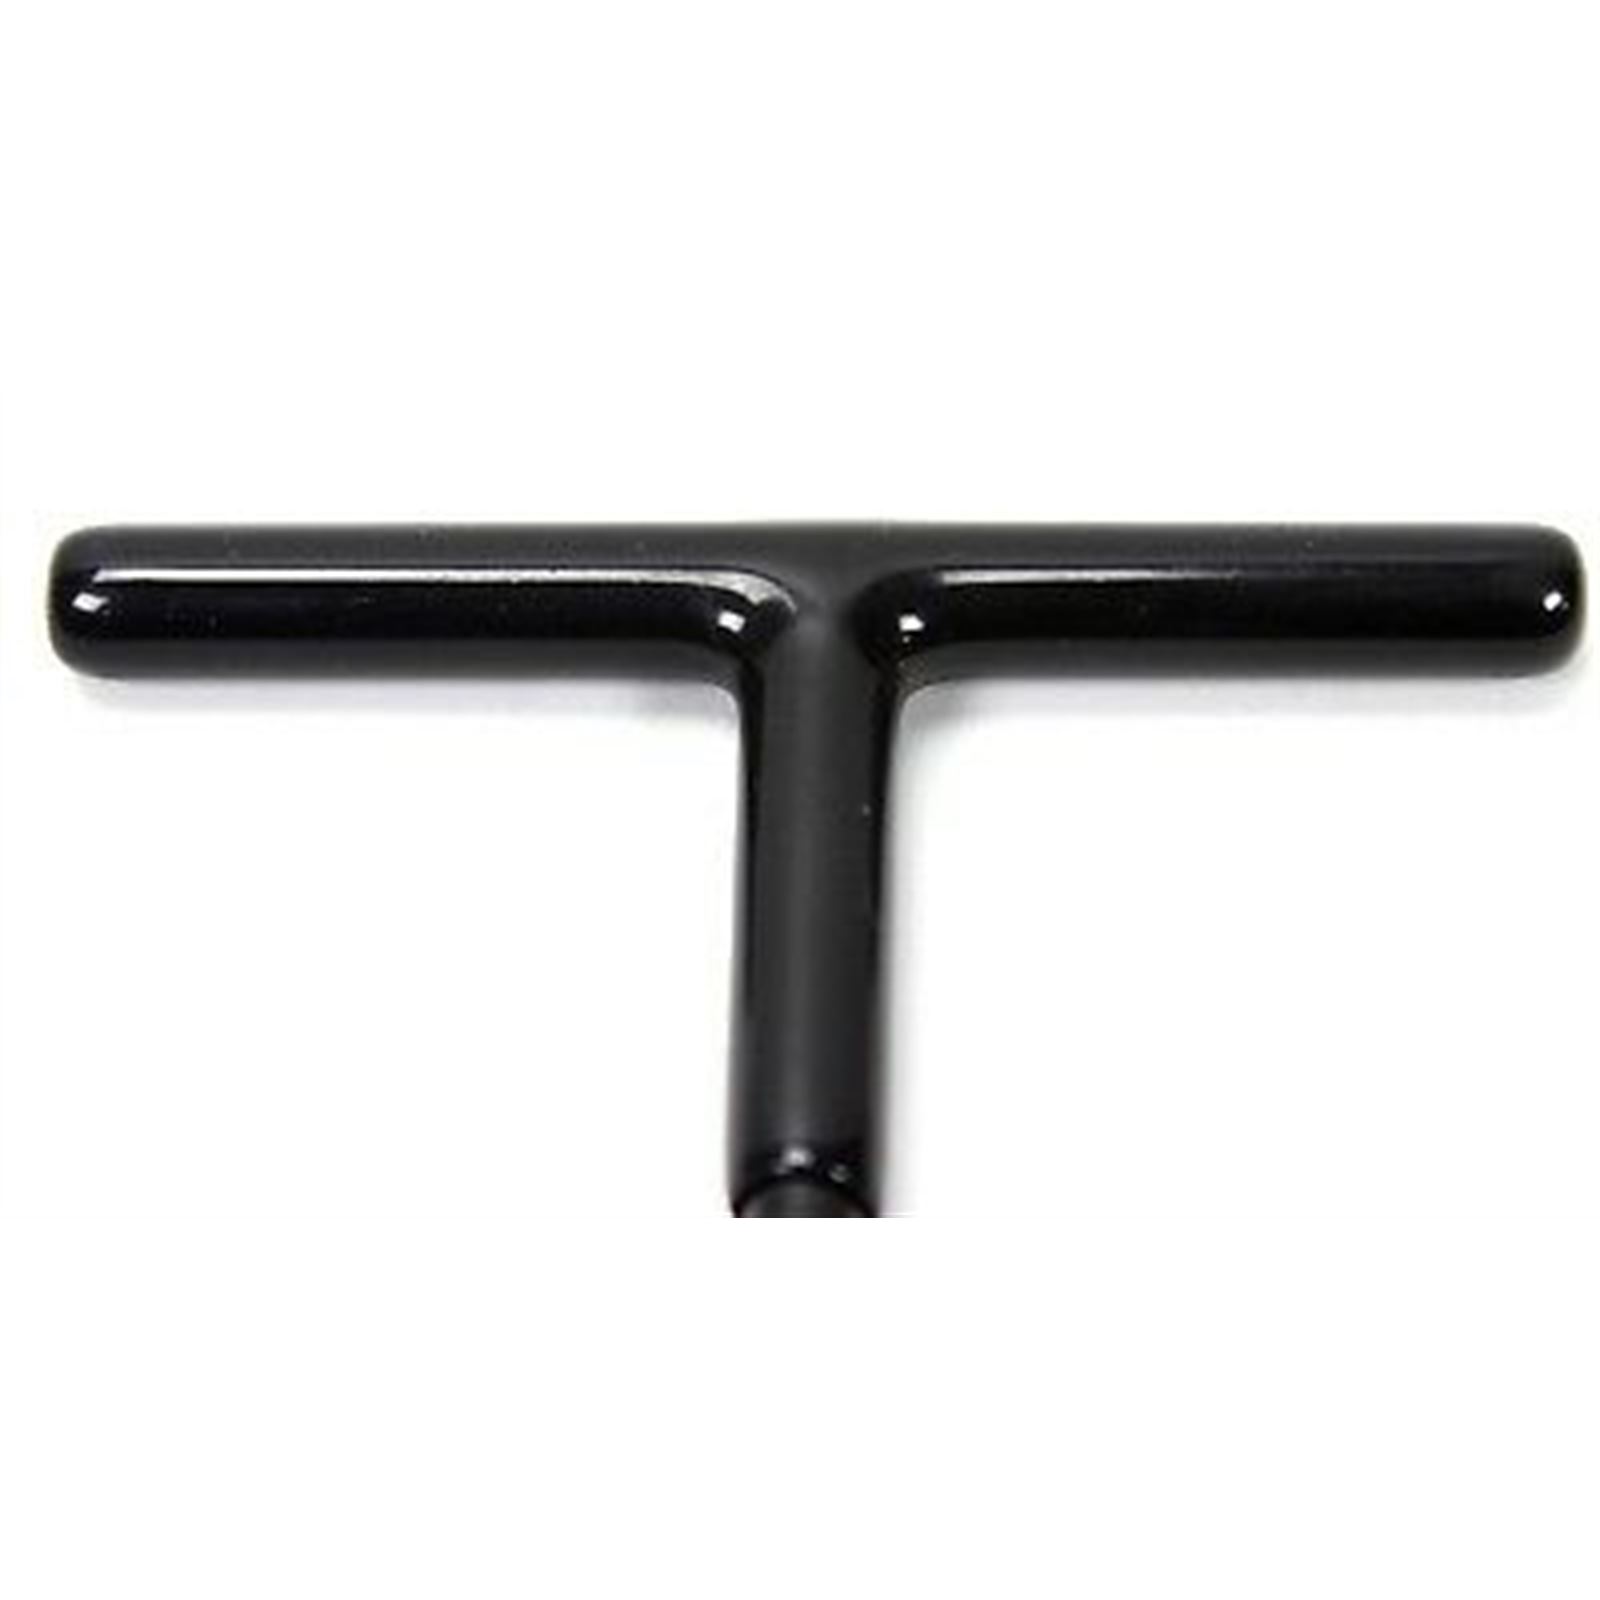 Wrench-X New Muffler Exhaust Kick Spring Puller Tool T-Handle Hook ATV Can Am 